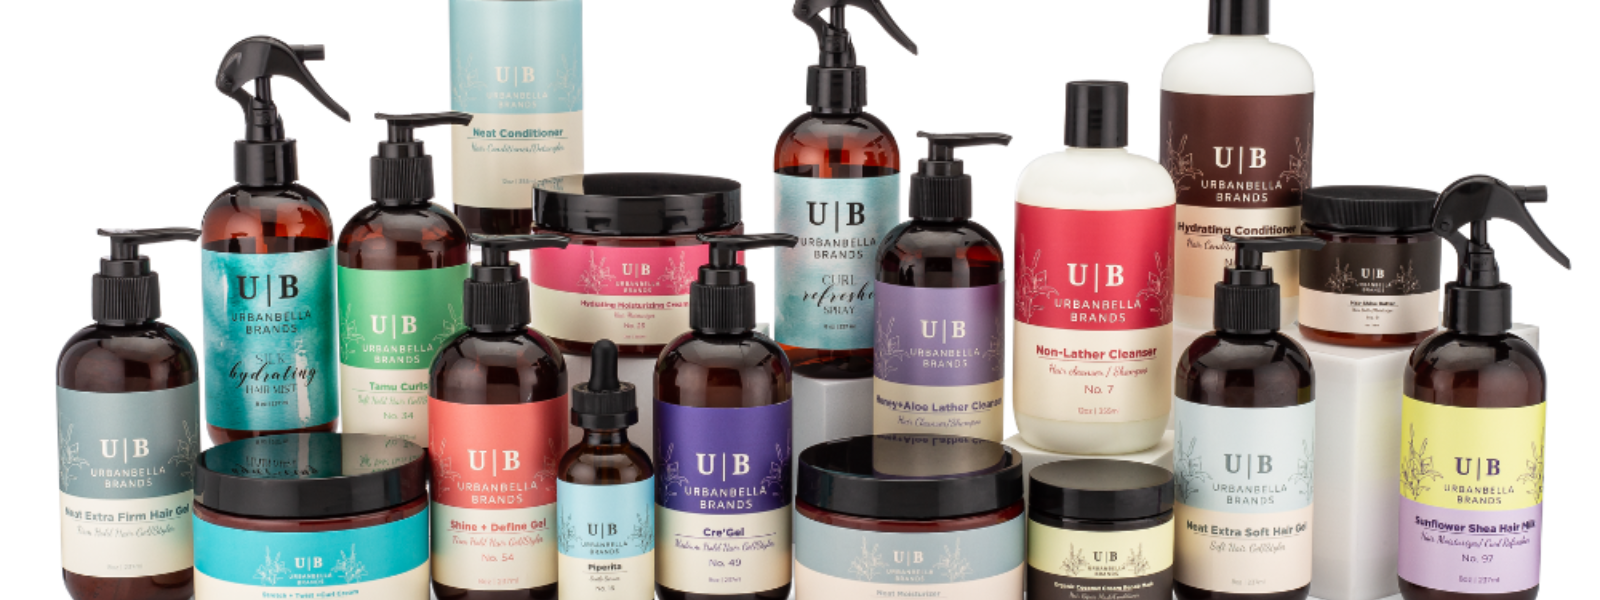 Urbanbella: Beauty products for natural hair and natural beauty